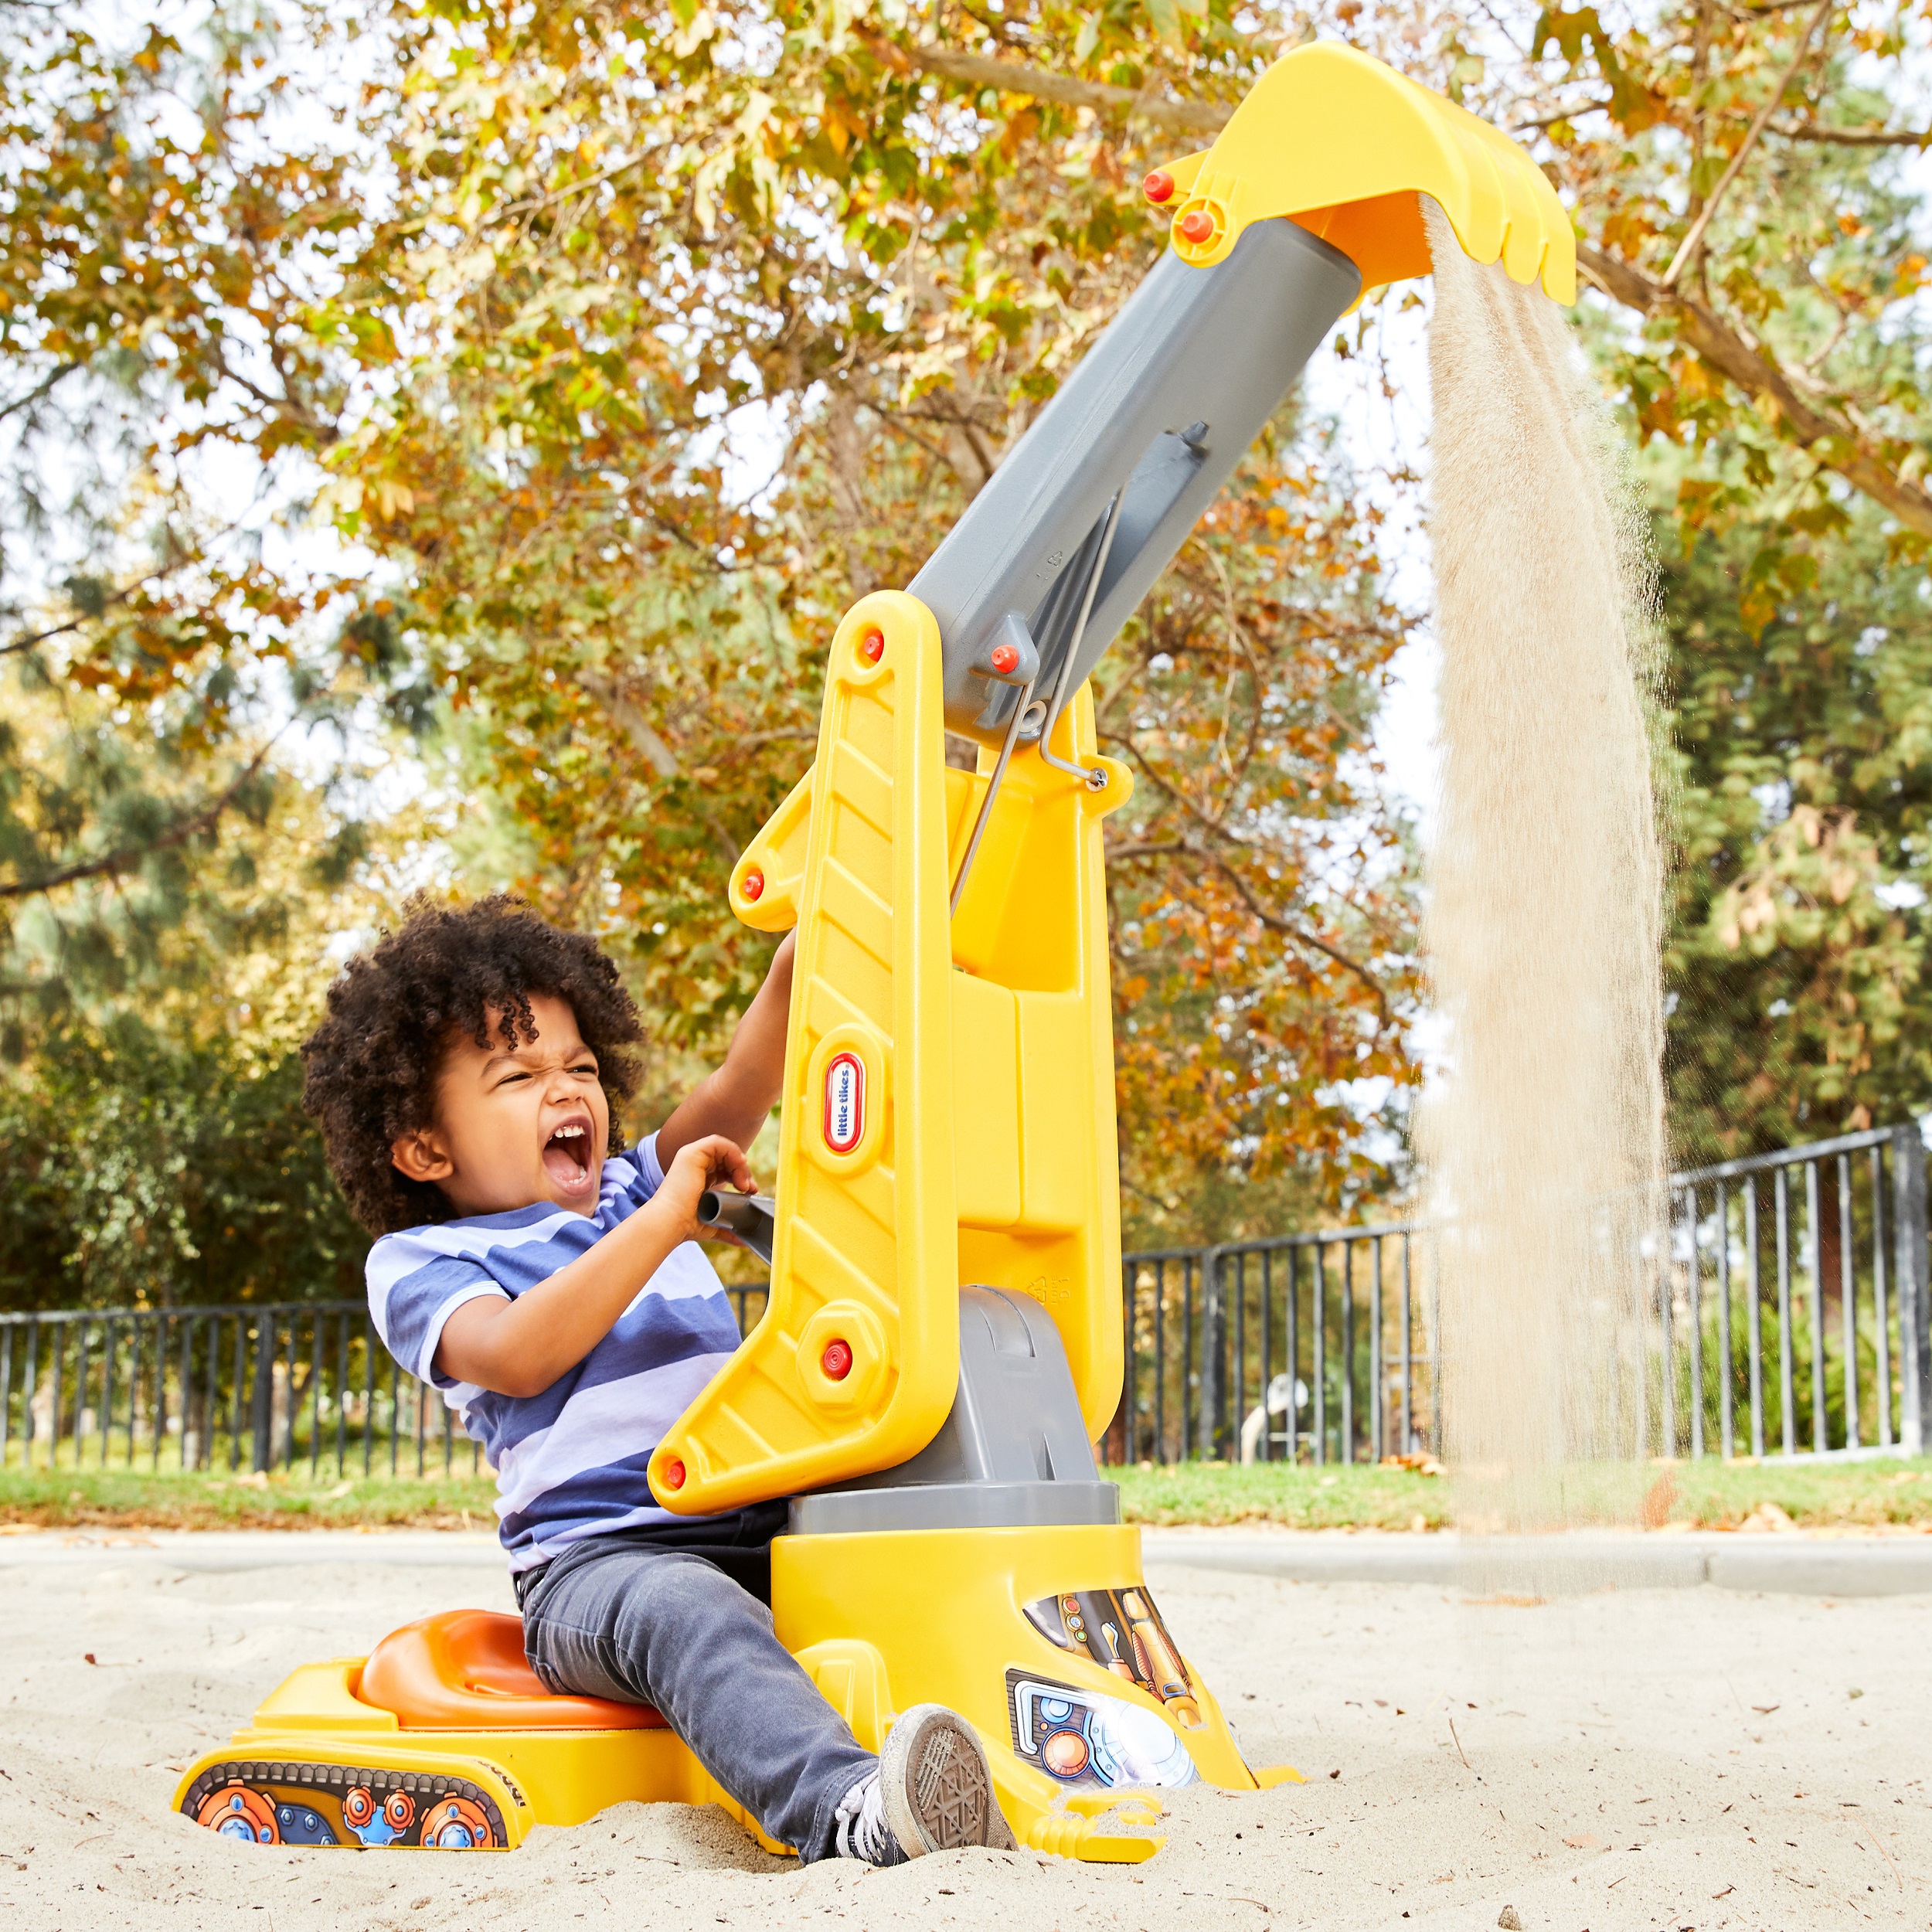 Little Tikes You Drive Sand Toy Excavator with Swivel For Sit and Stand Scoop and Dump Play Set with Kid-Sized Crane, Yellow- Toys For Kids Toddlers Boys Girls Ages 3 4 5+ - image 4 of 7